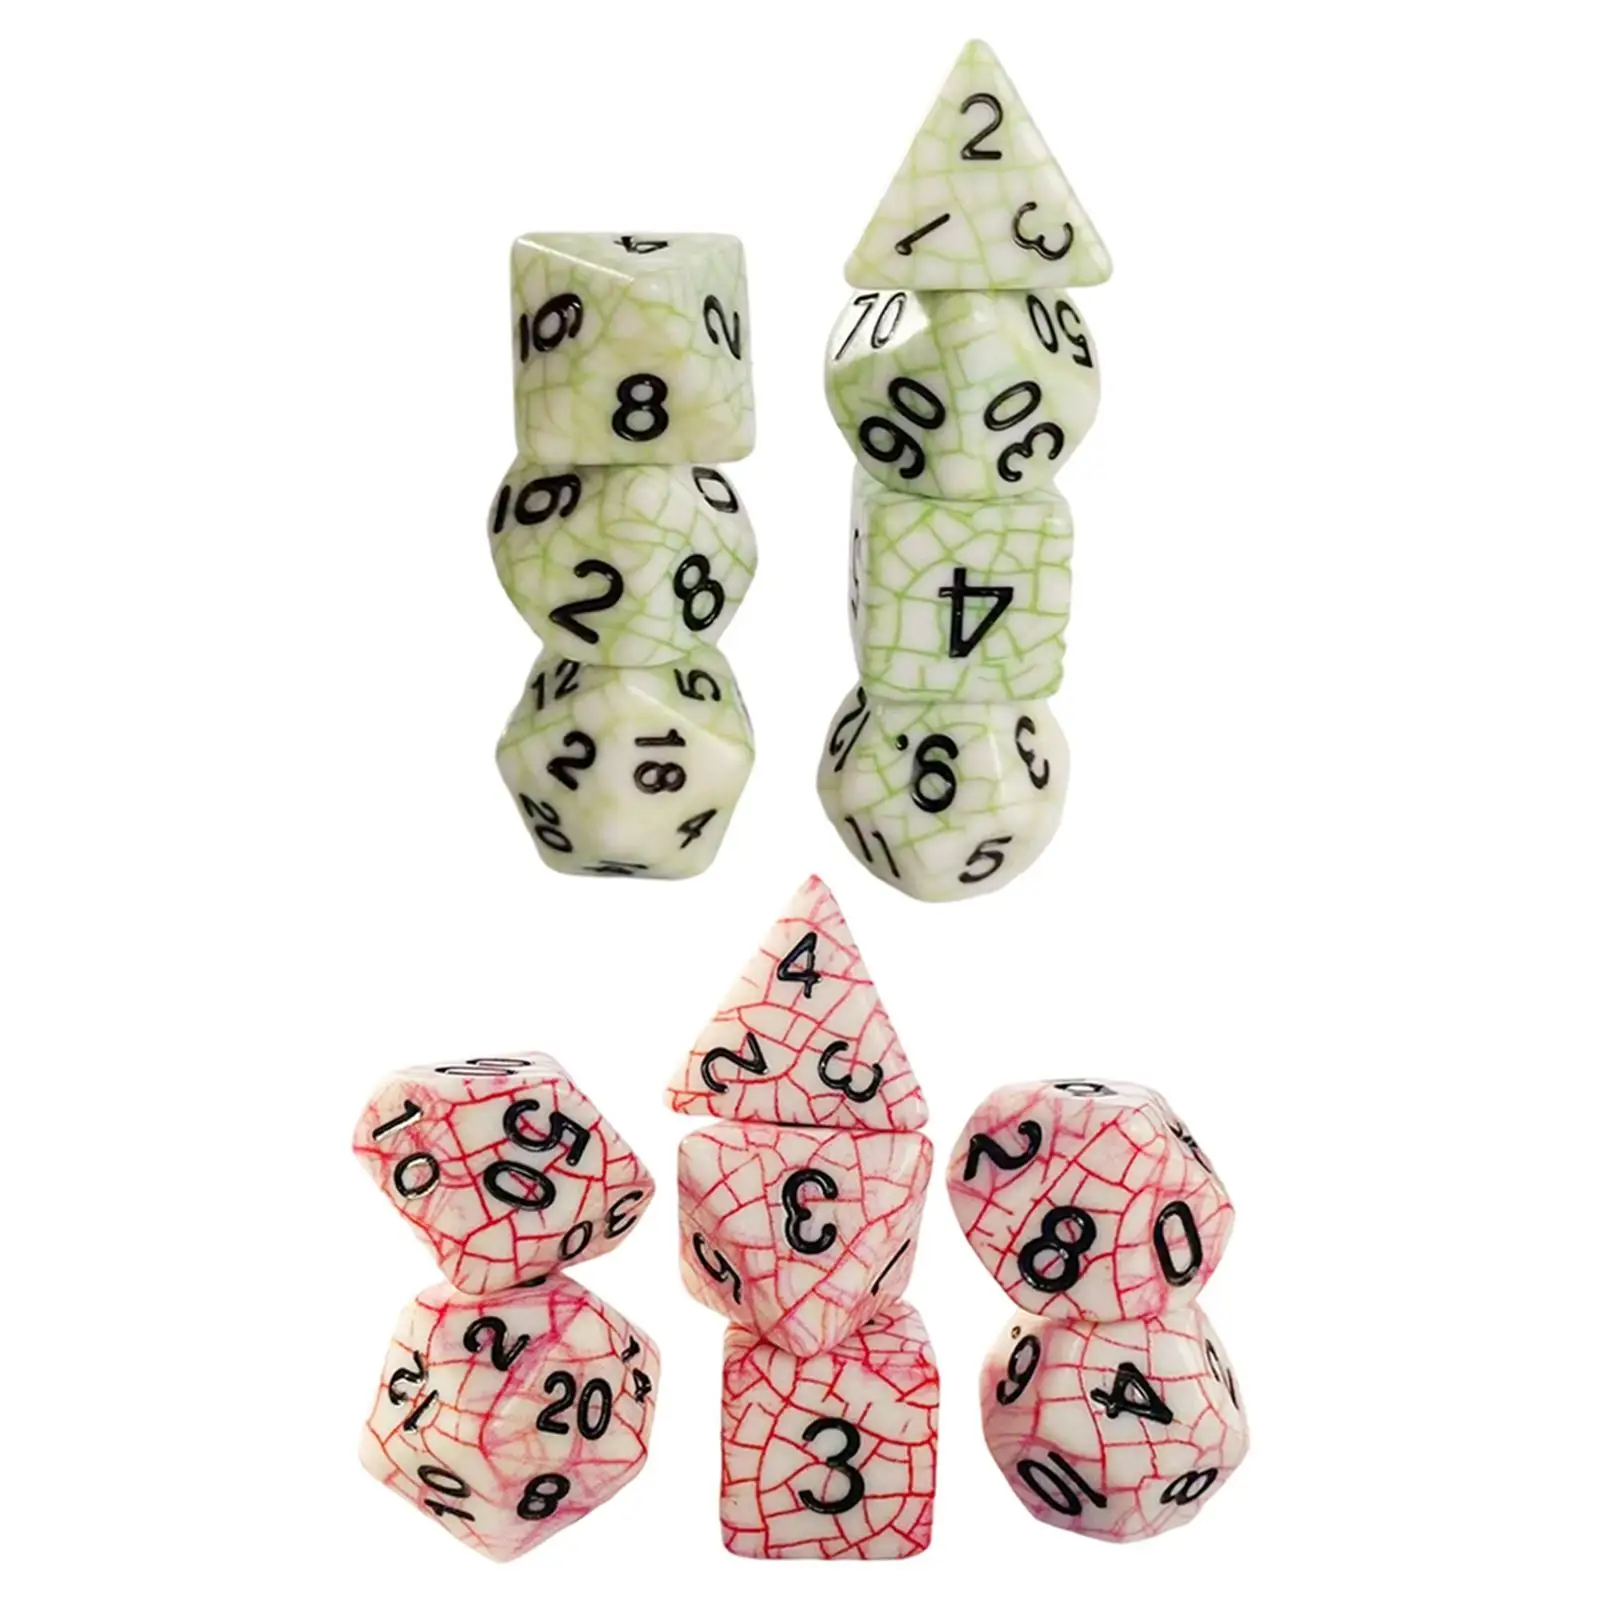 7x Acrylic Polyhedron Dice, D4-D20 Die D20 D12 D10 D10% D8 D6 D4, Multi Sided Dice Set, for Party Prop Entertainment DND RPG MTG